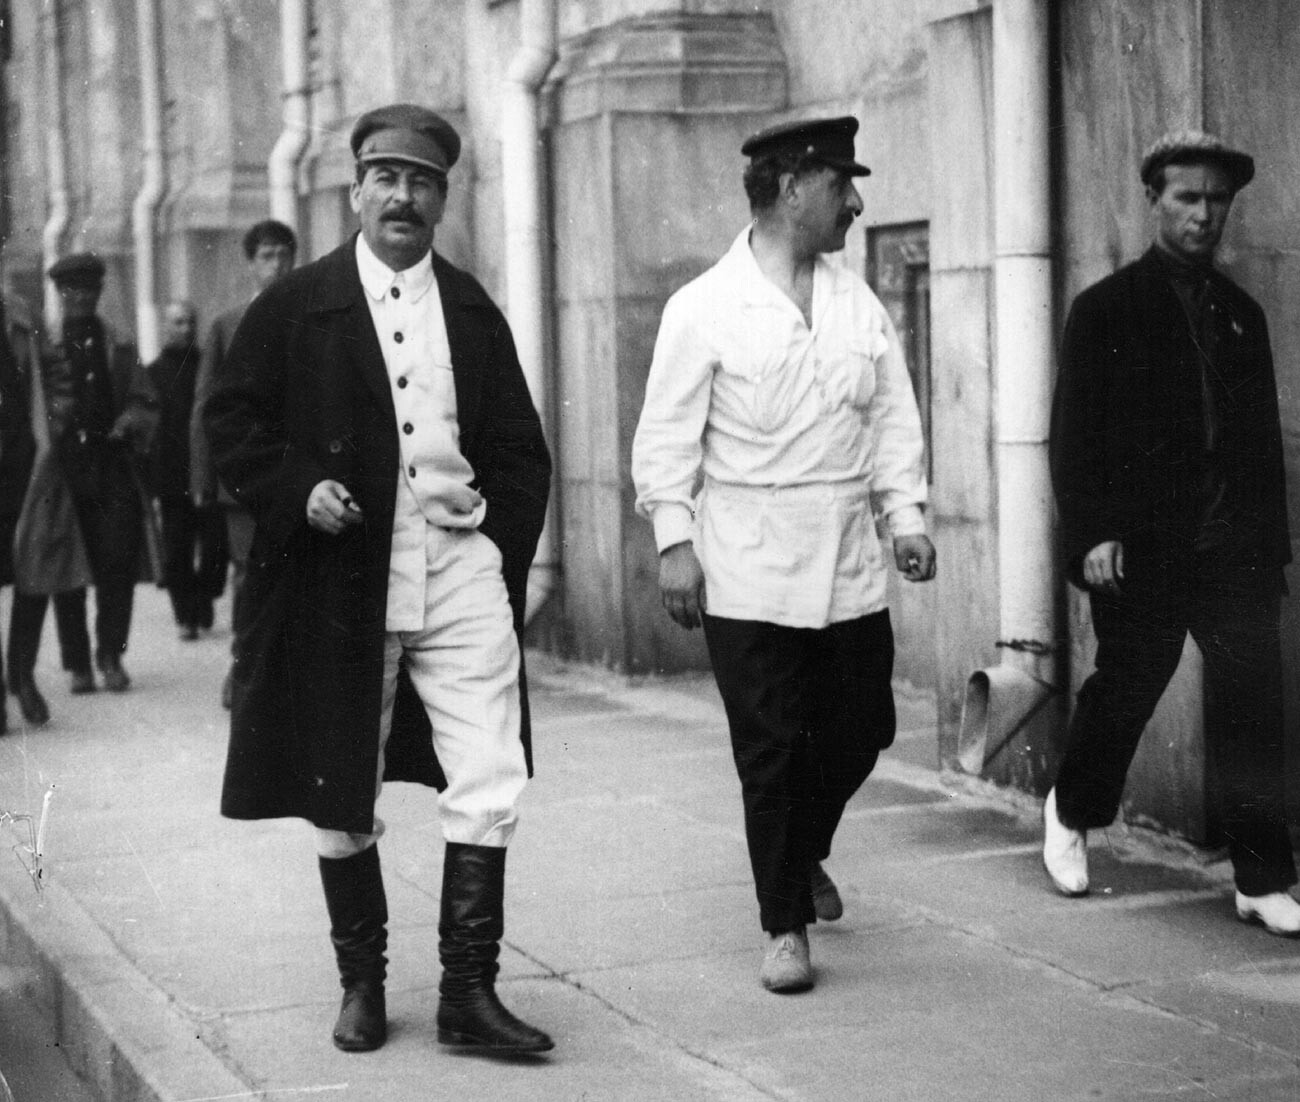 Soviet leader Joseph Stalin in the streets of Moscow, late 1920s.